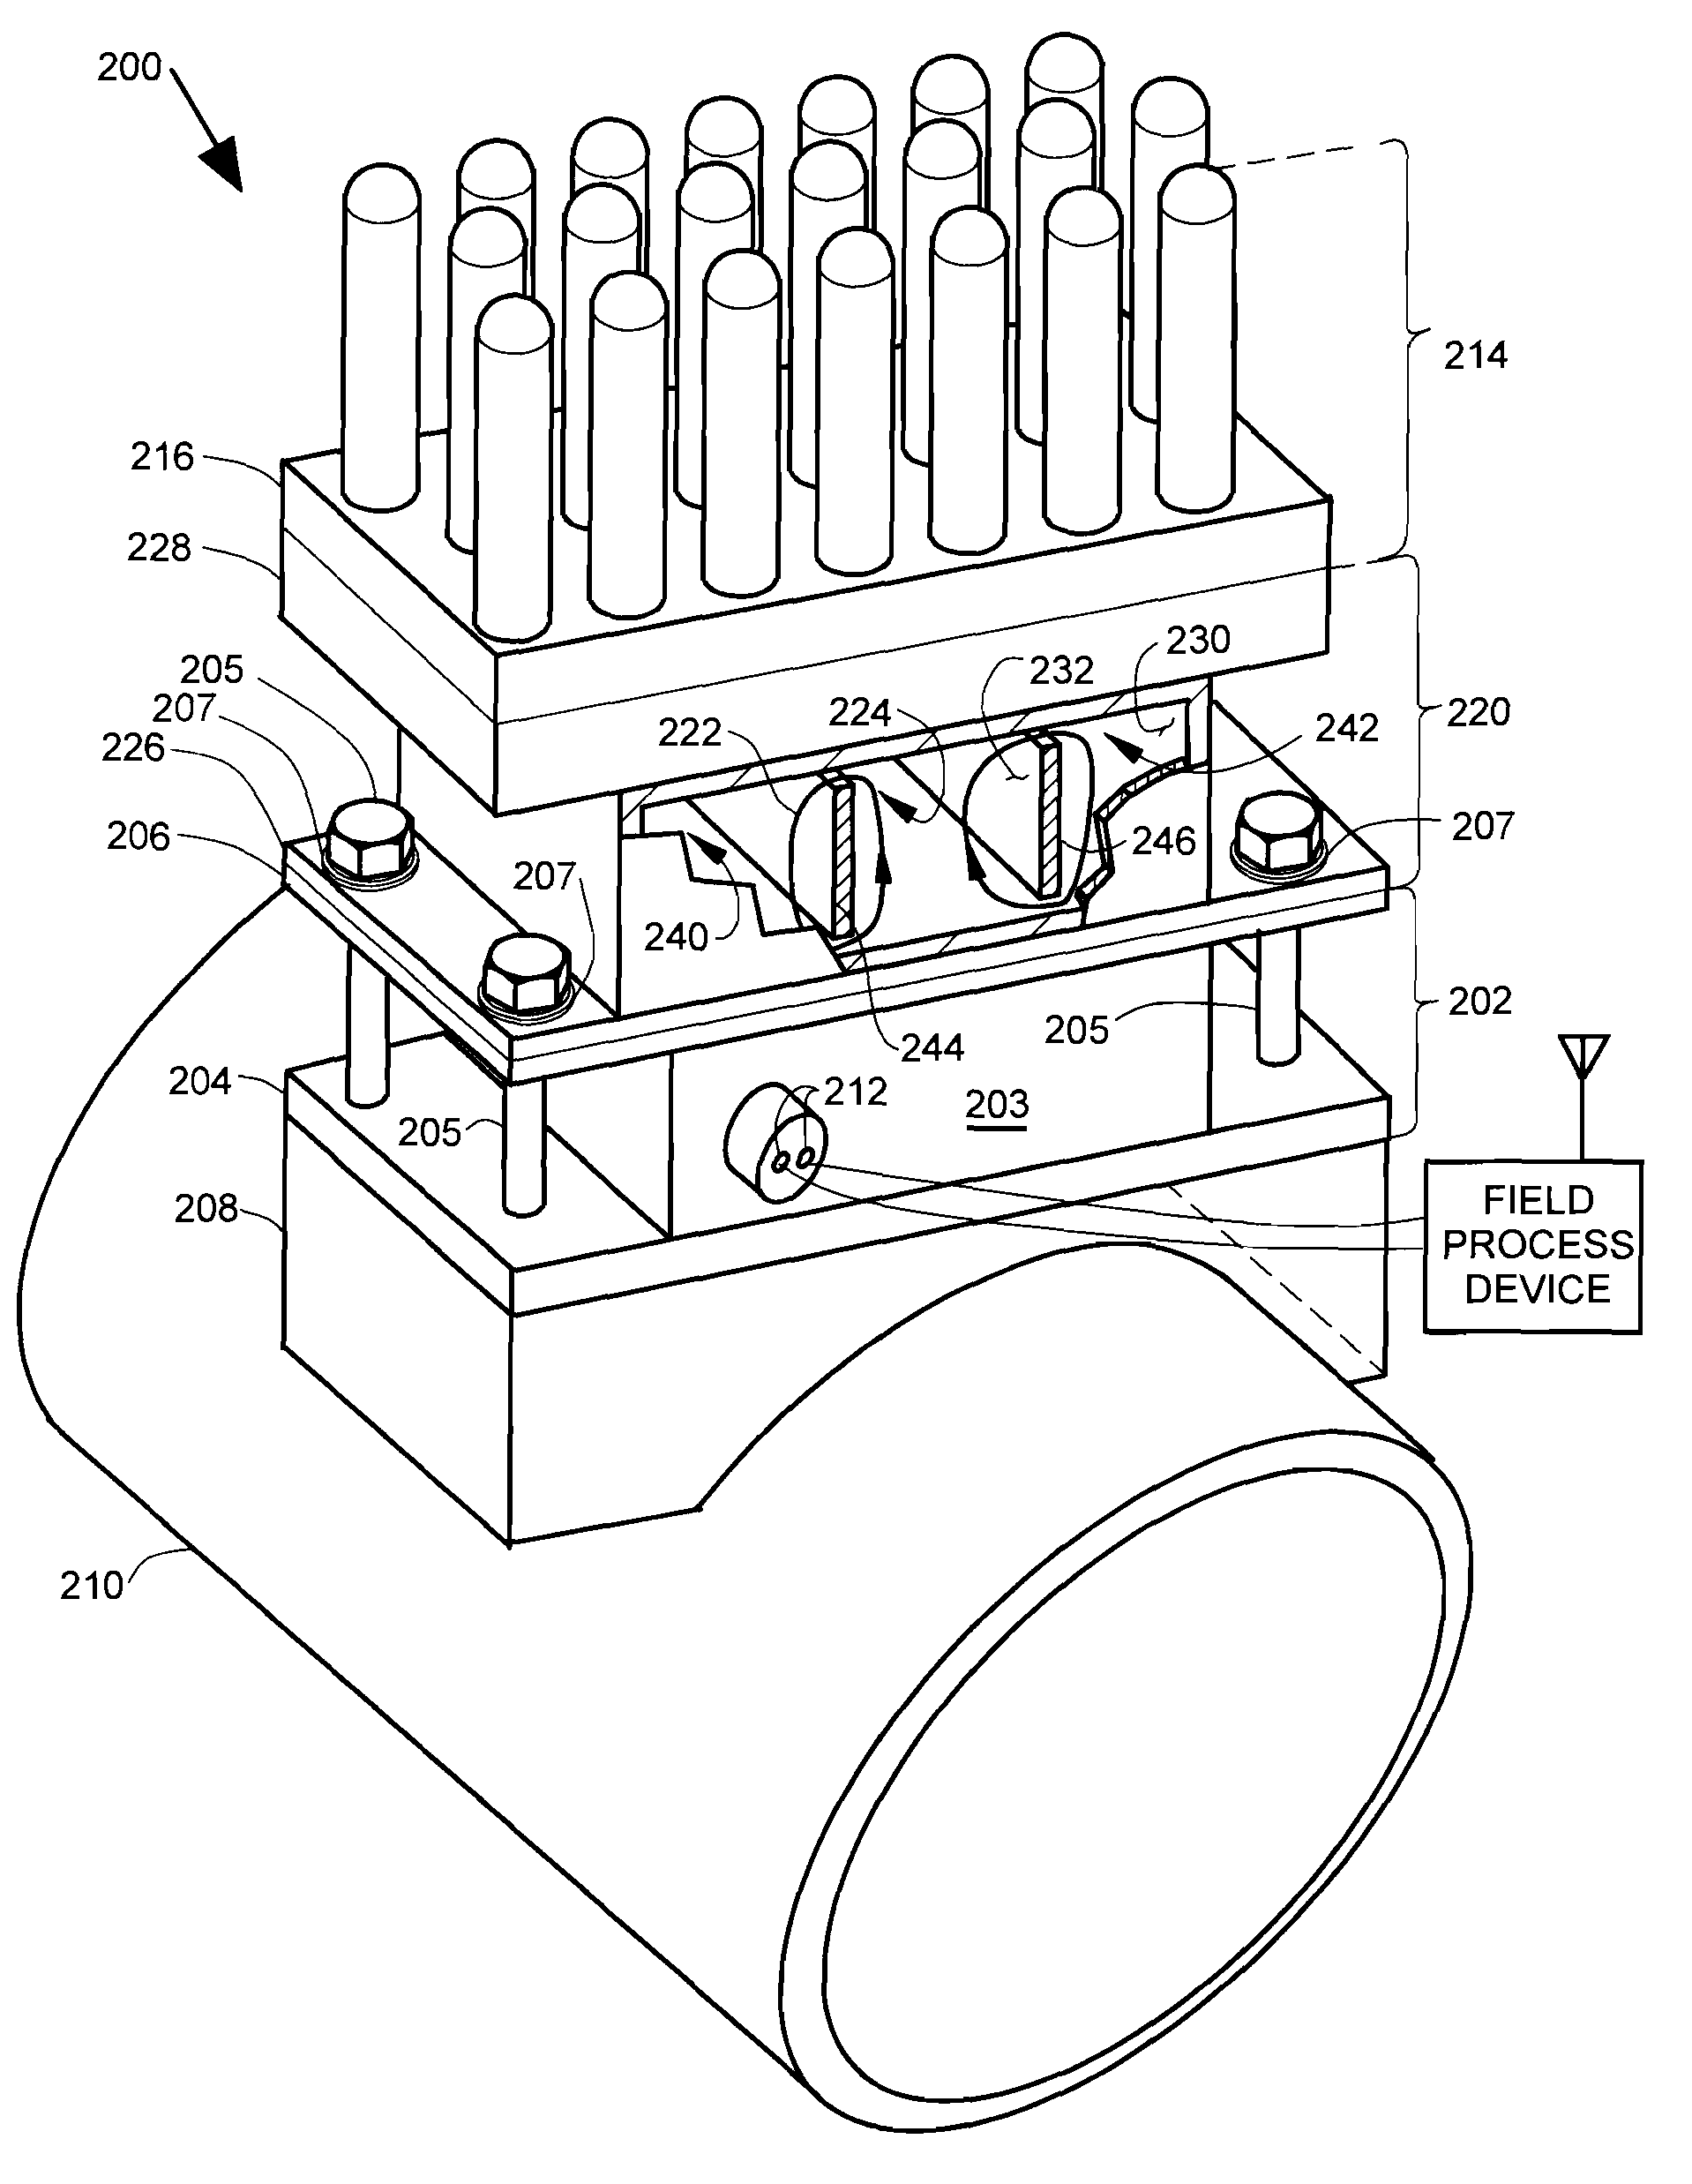 Thermoelectric generator assembly for field process devices